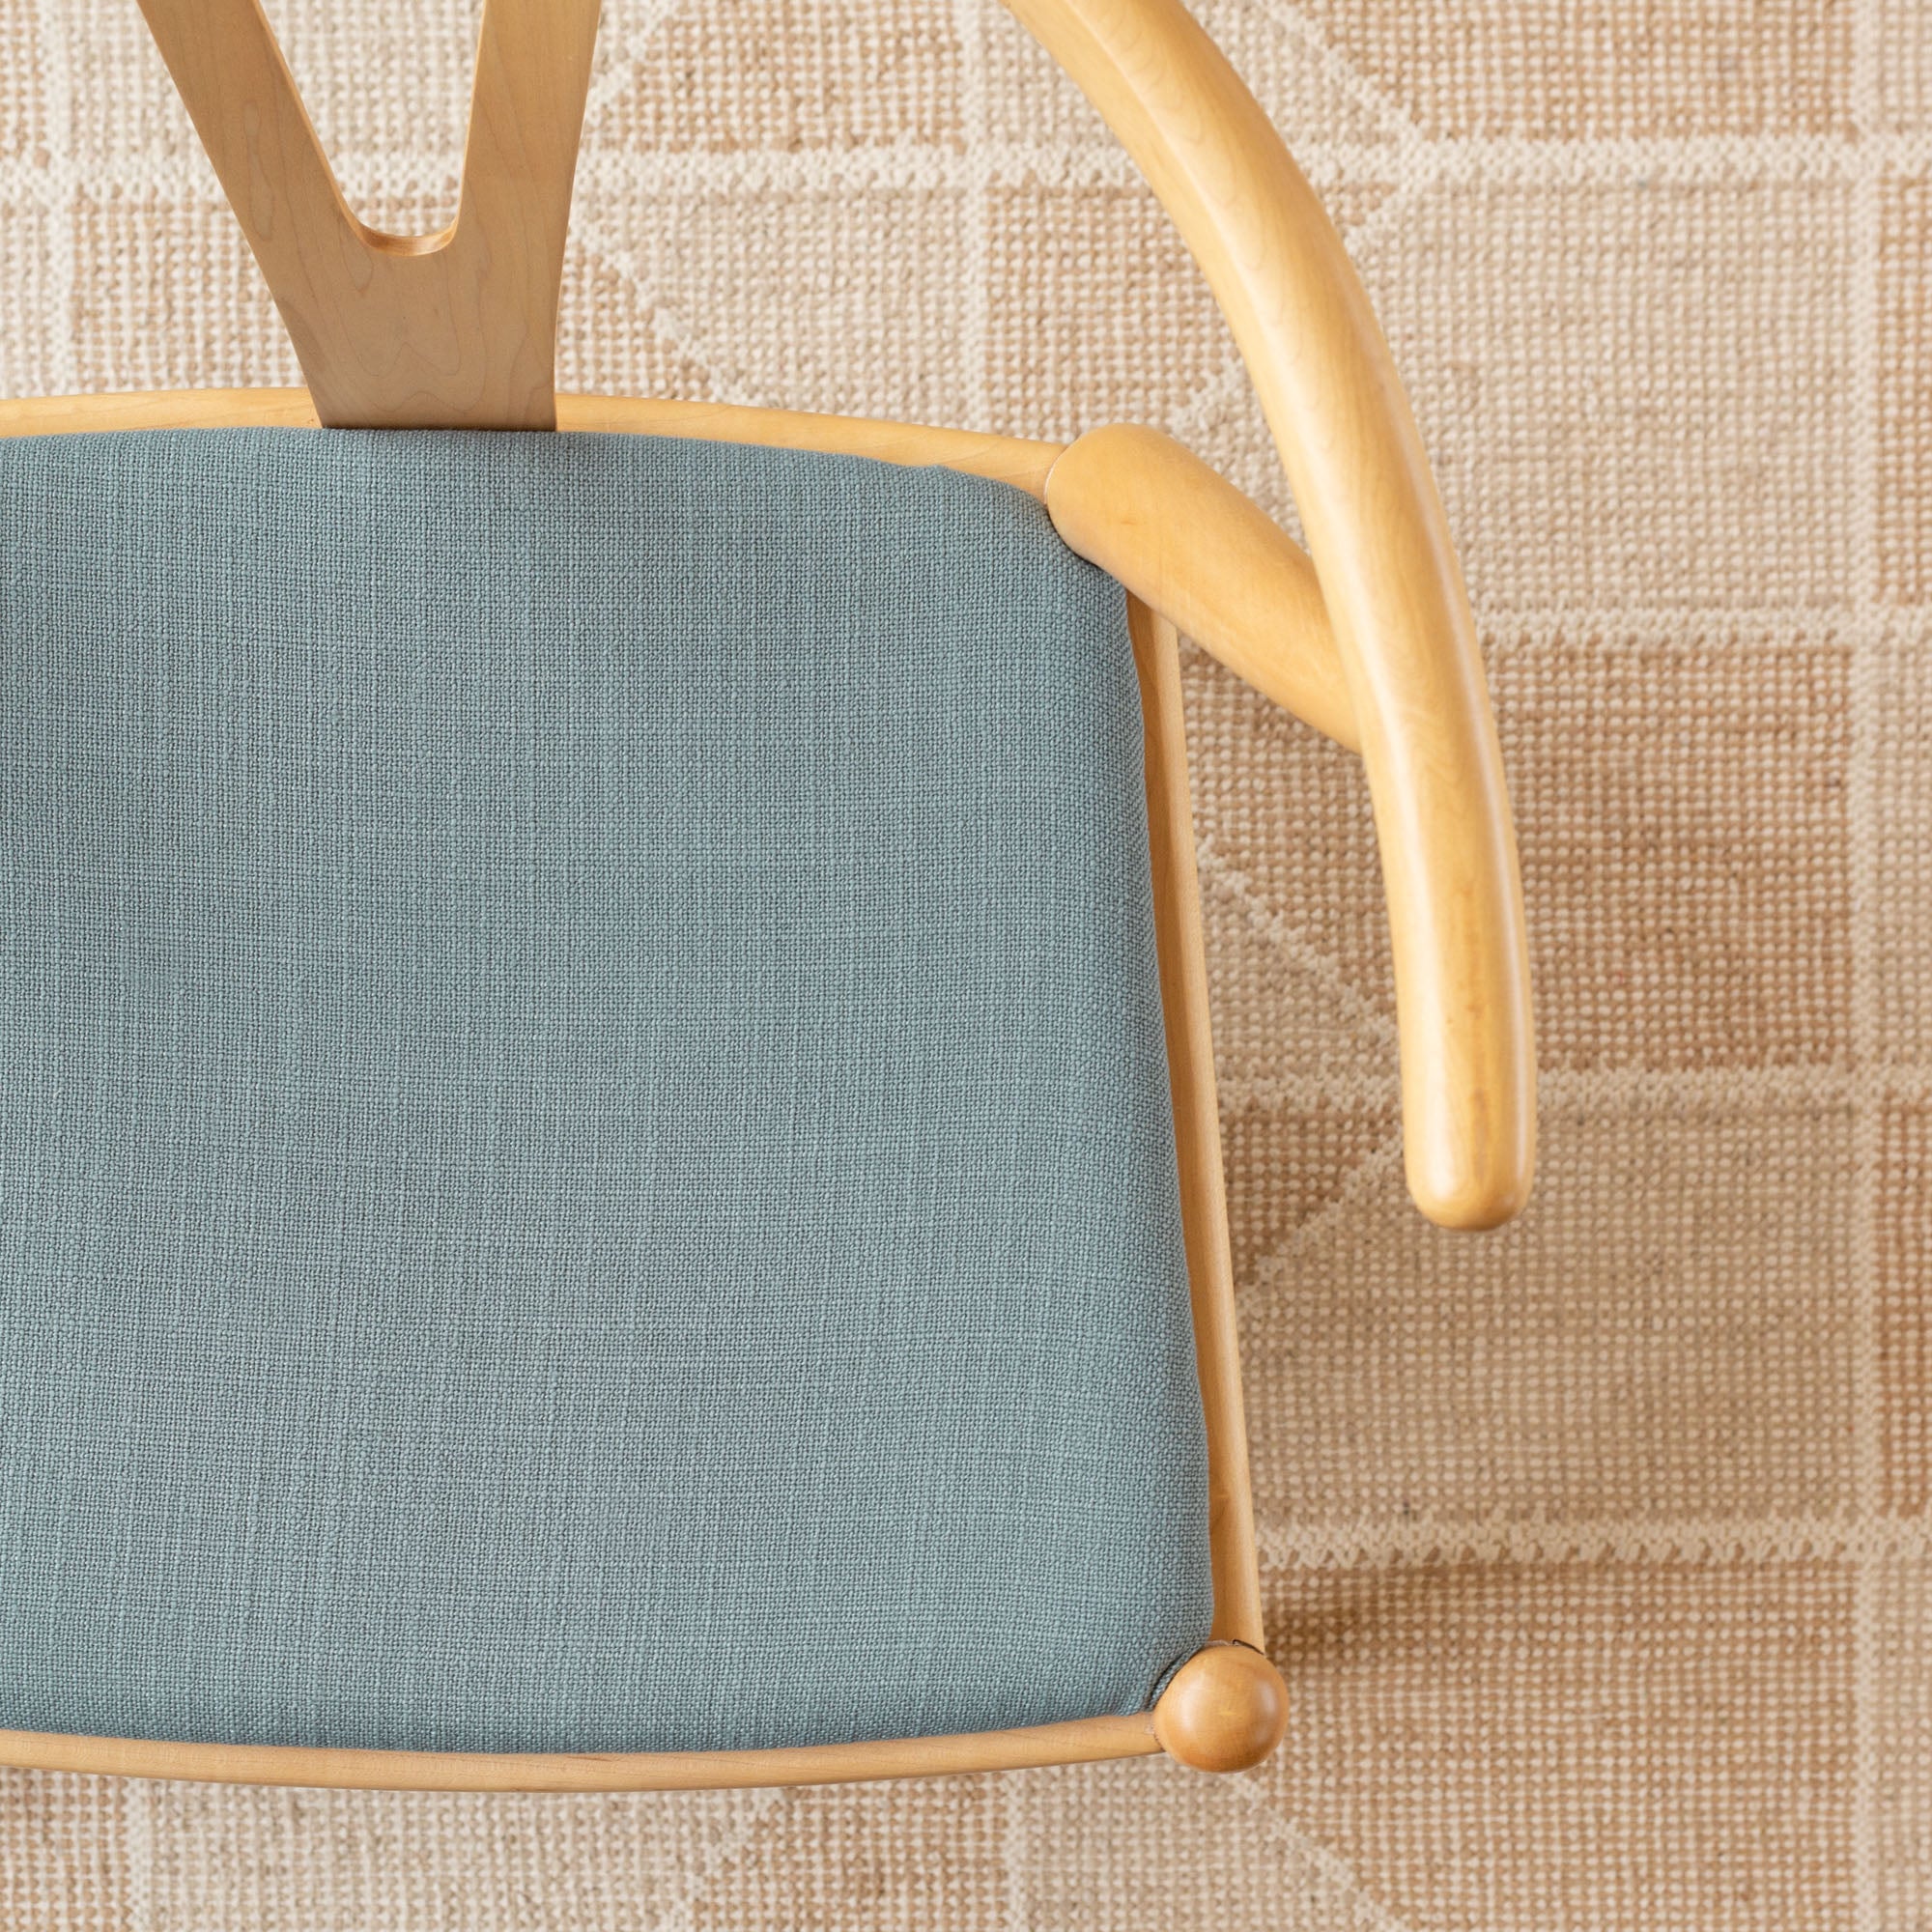 Grange Seaspray, a watery blue high performance upholstery fabric shown on a chair seat